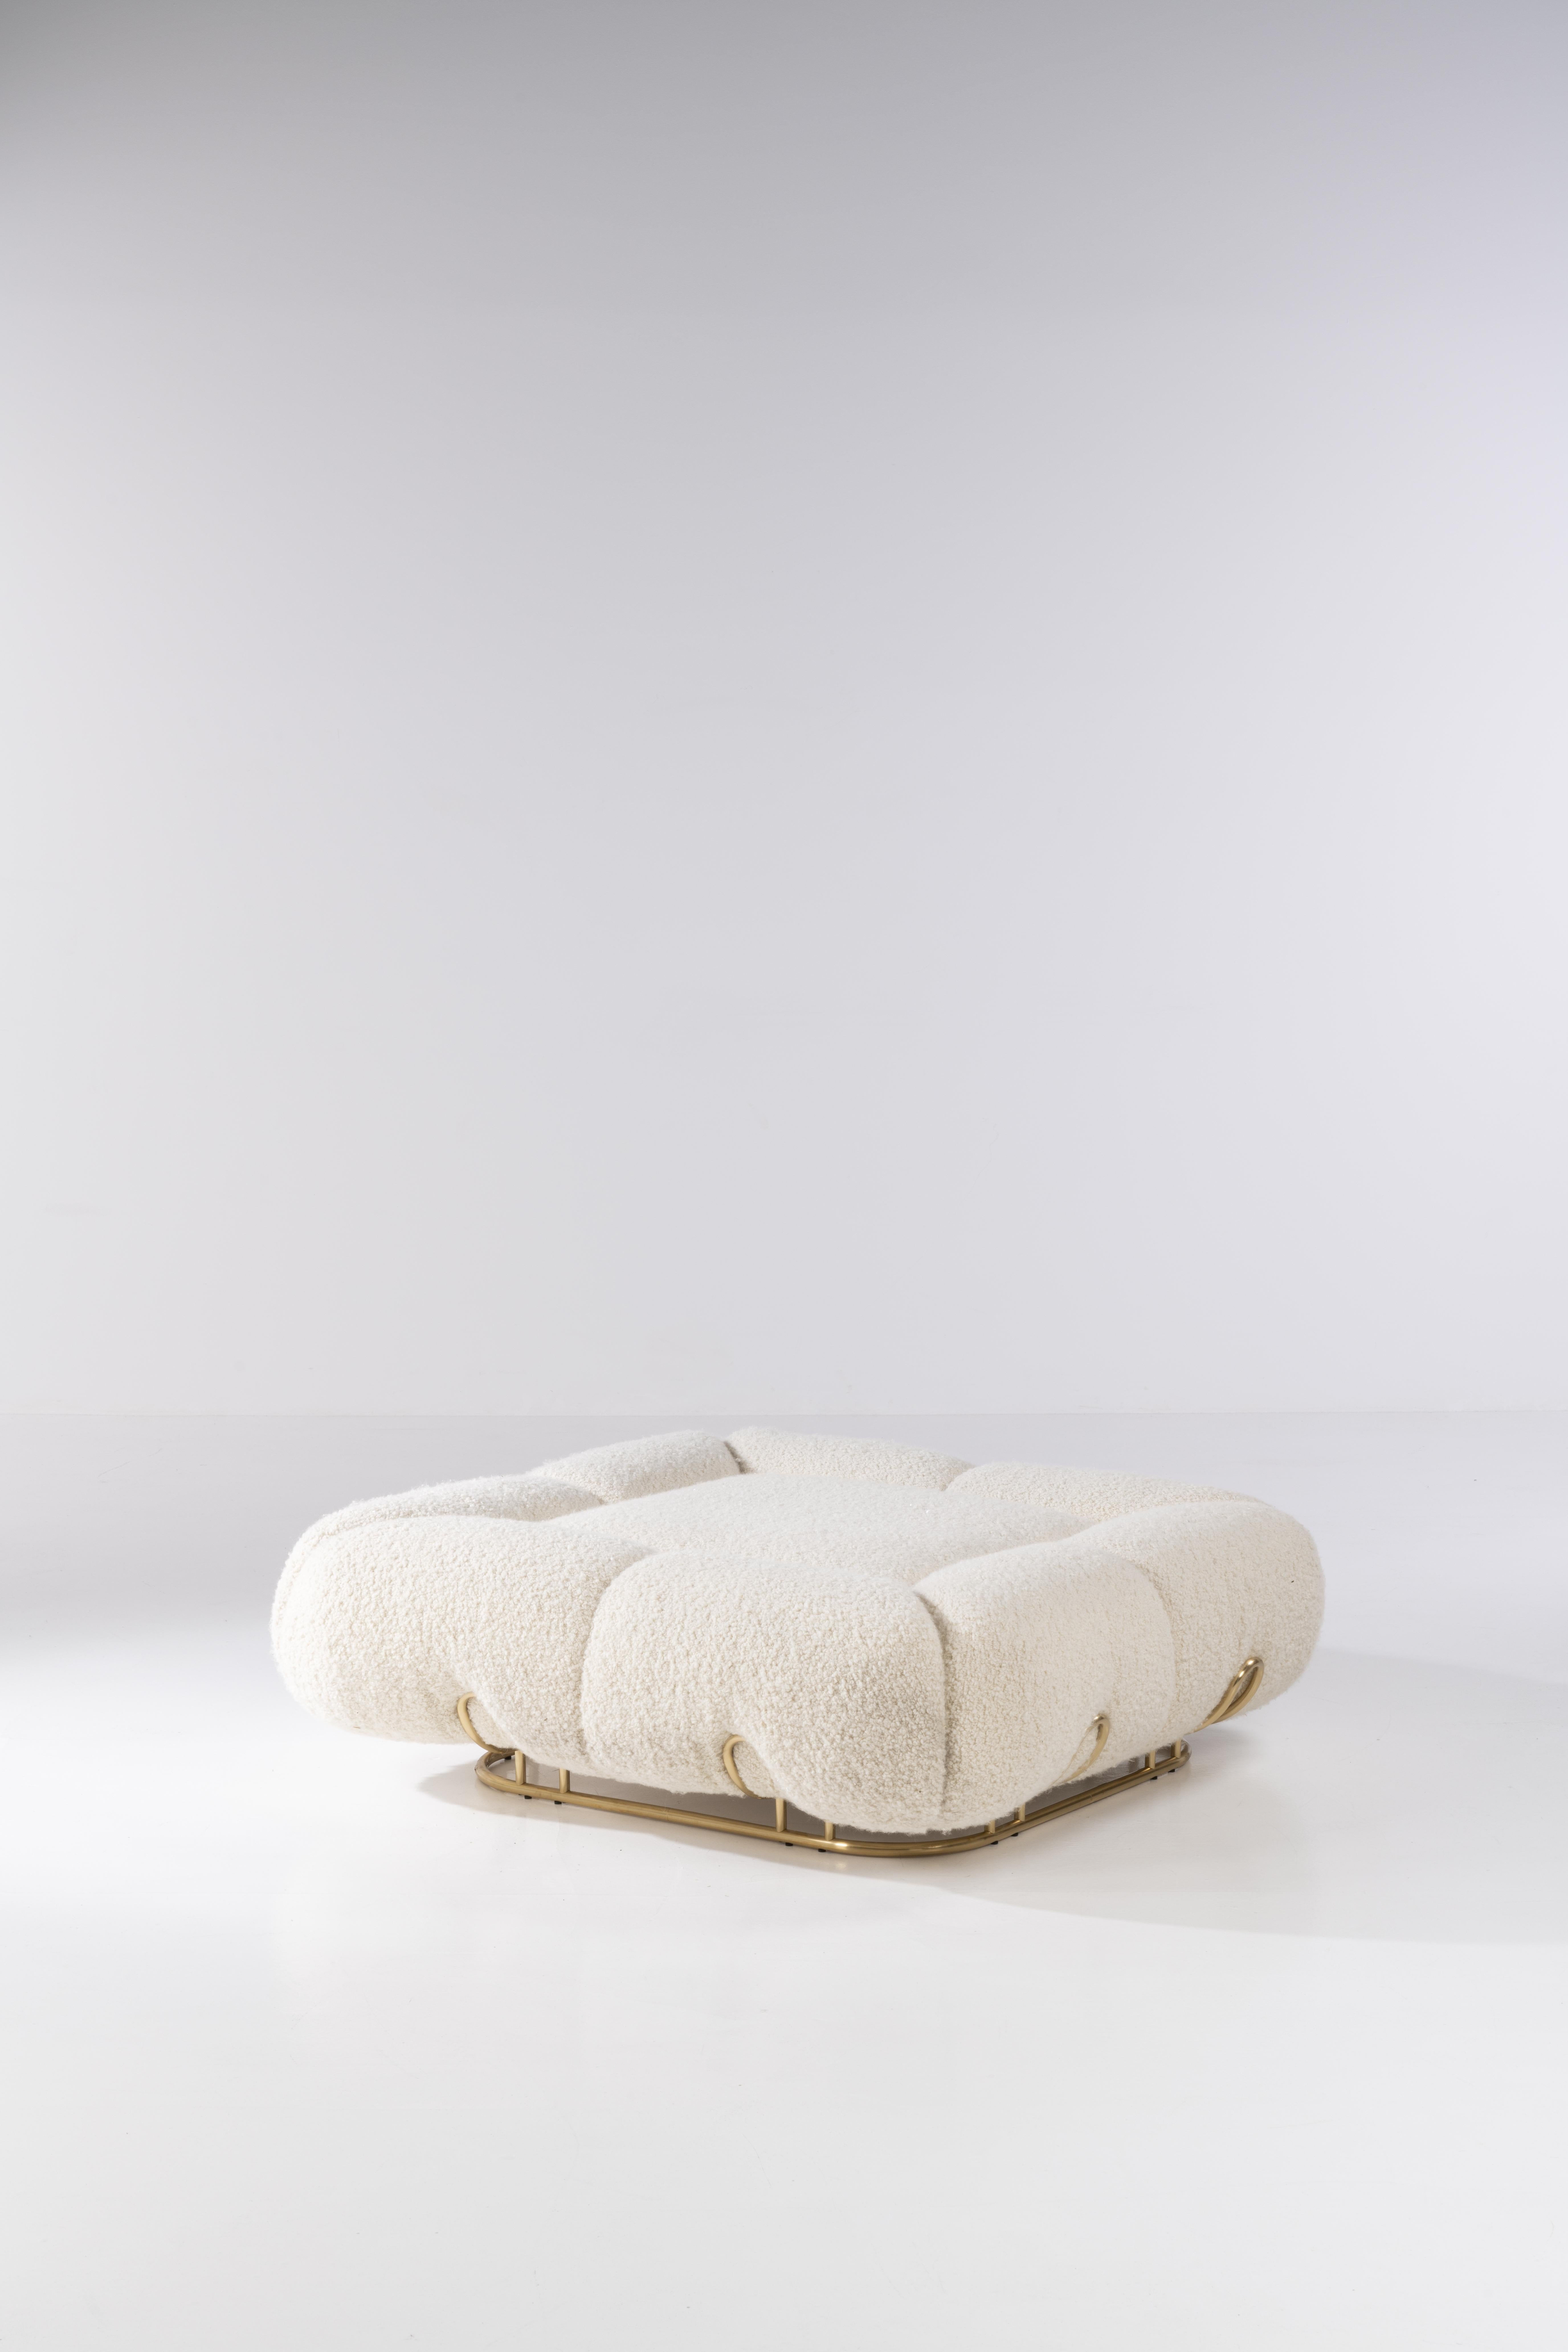 Unique pouf marshmallow by Draga & Aurel
Dimensions: W 120 D 120 H 38
Materials: Wool 

Deliciously soft and fluffy. This is the design of Marshmallow pouf, whose soft shapes live up to its name. It stands out for its polished brass structure